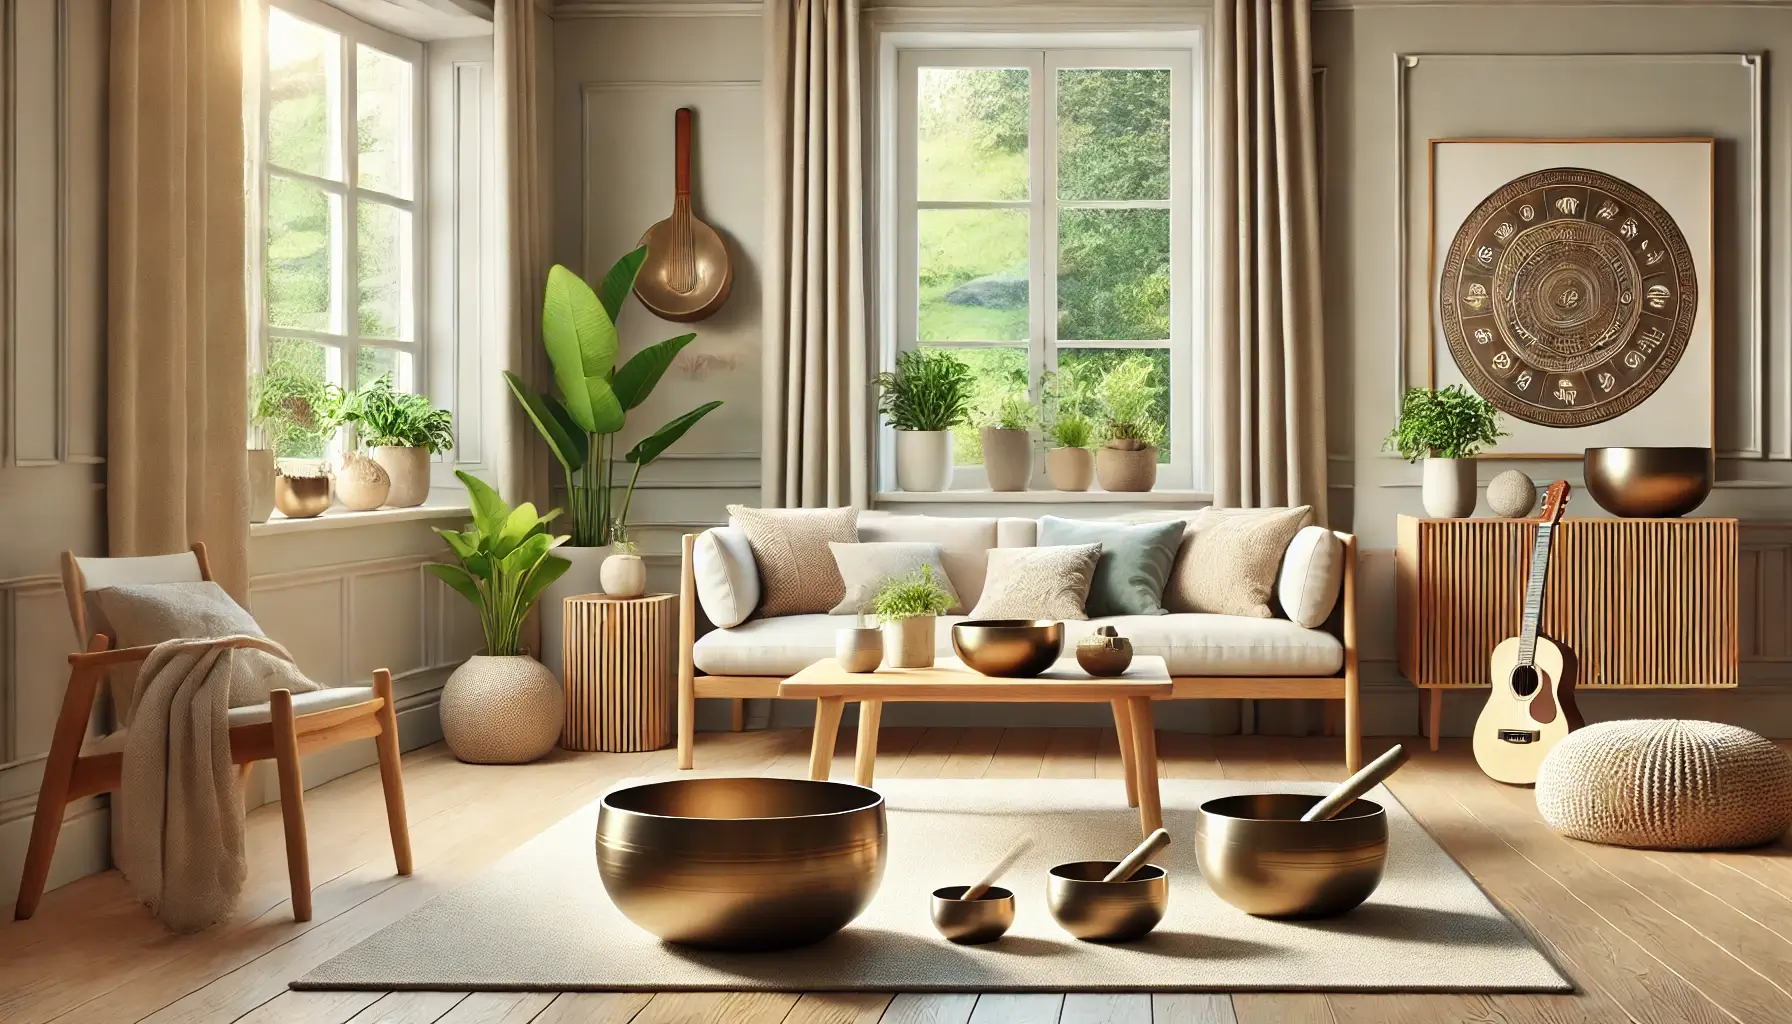 A beautifully decorated living room featuring Tibetan singing bowls. the room has a calm and serene atmosphere with the bowls placed strategically on a table.